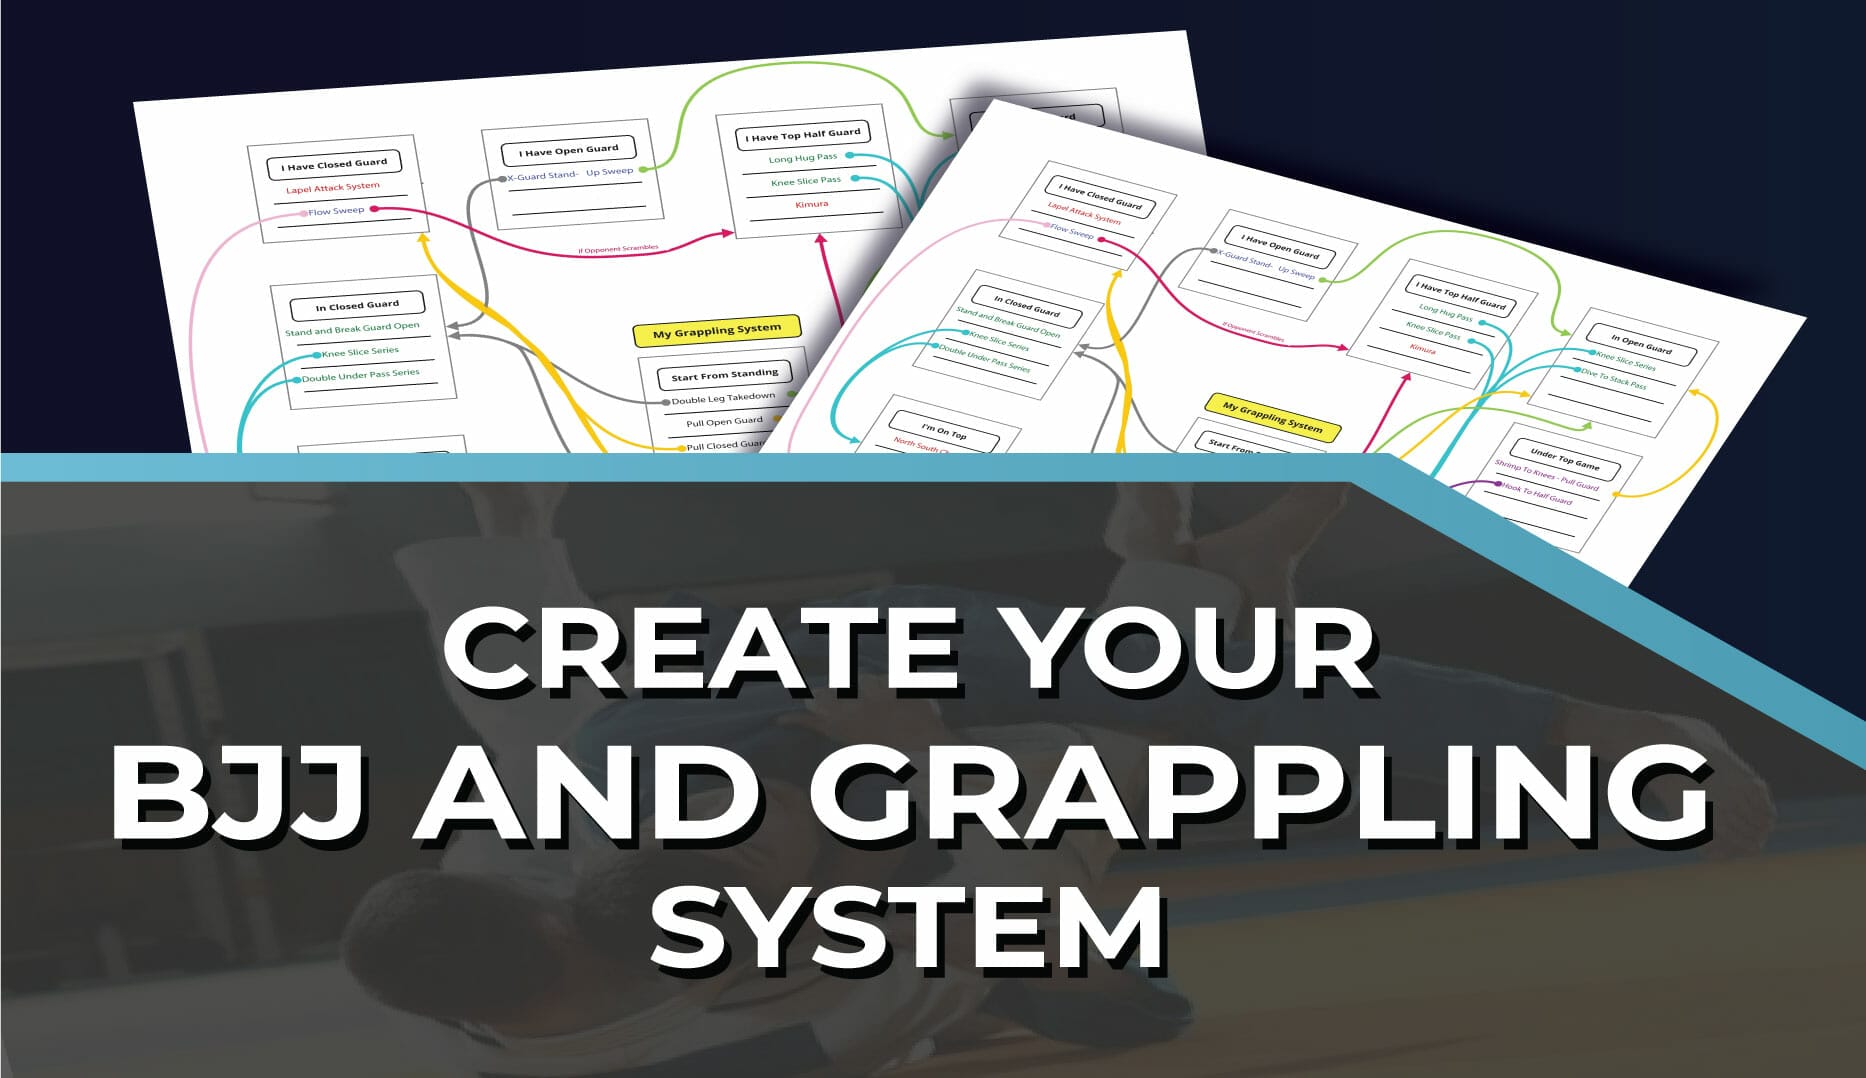 The Grapplers Guide – Dedicated 100% To Your Grappling Improvement